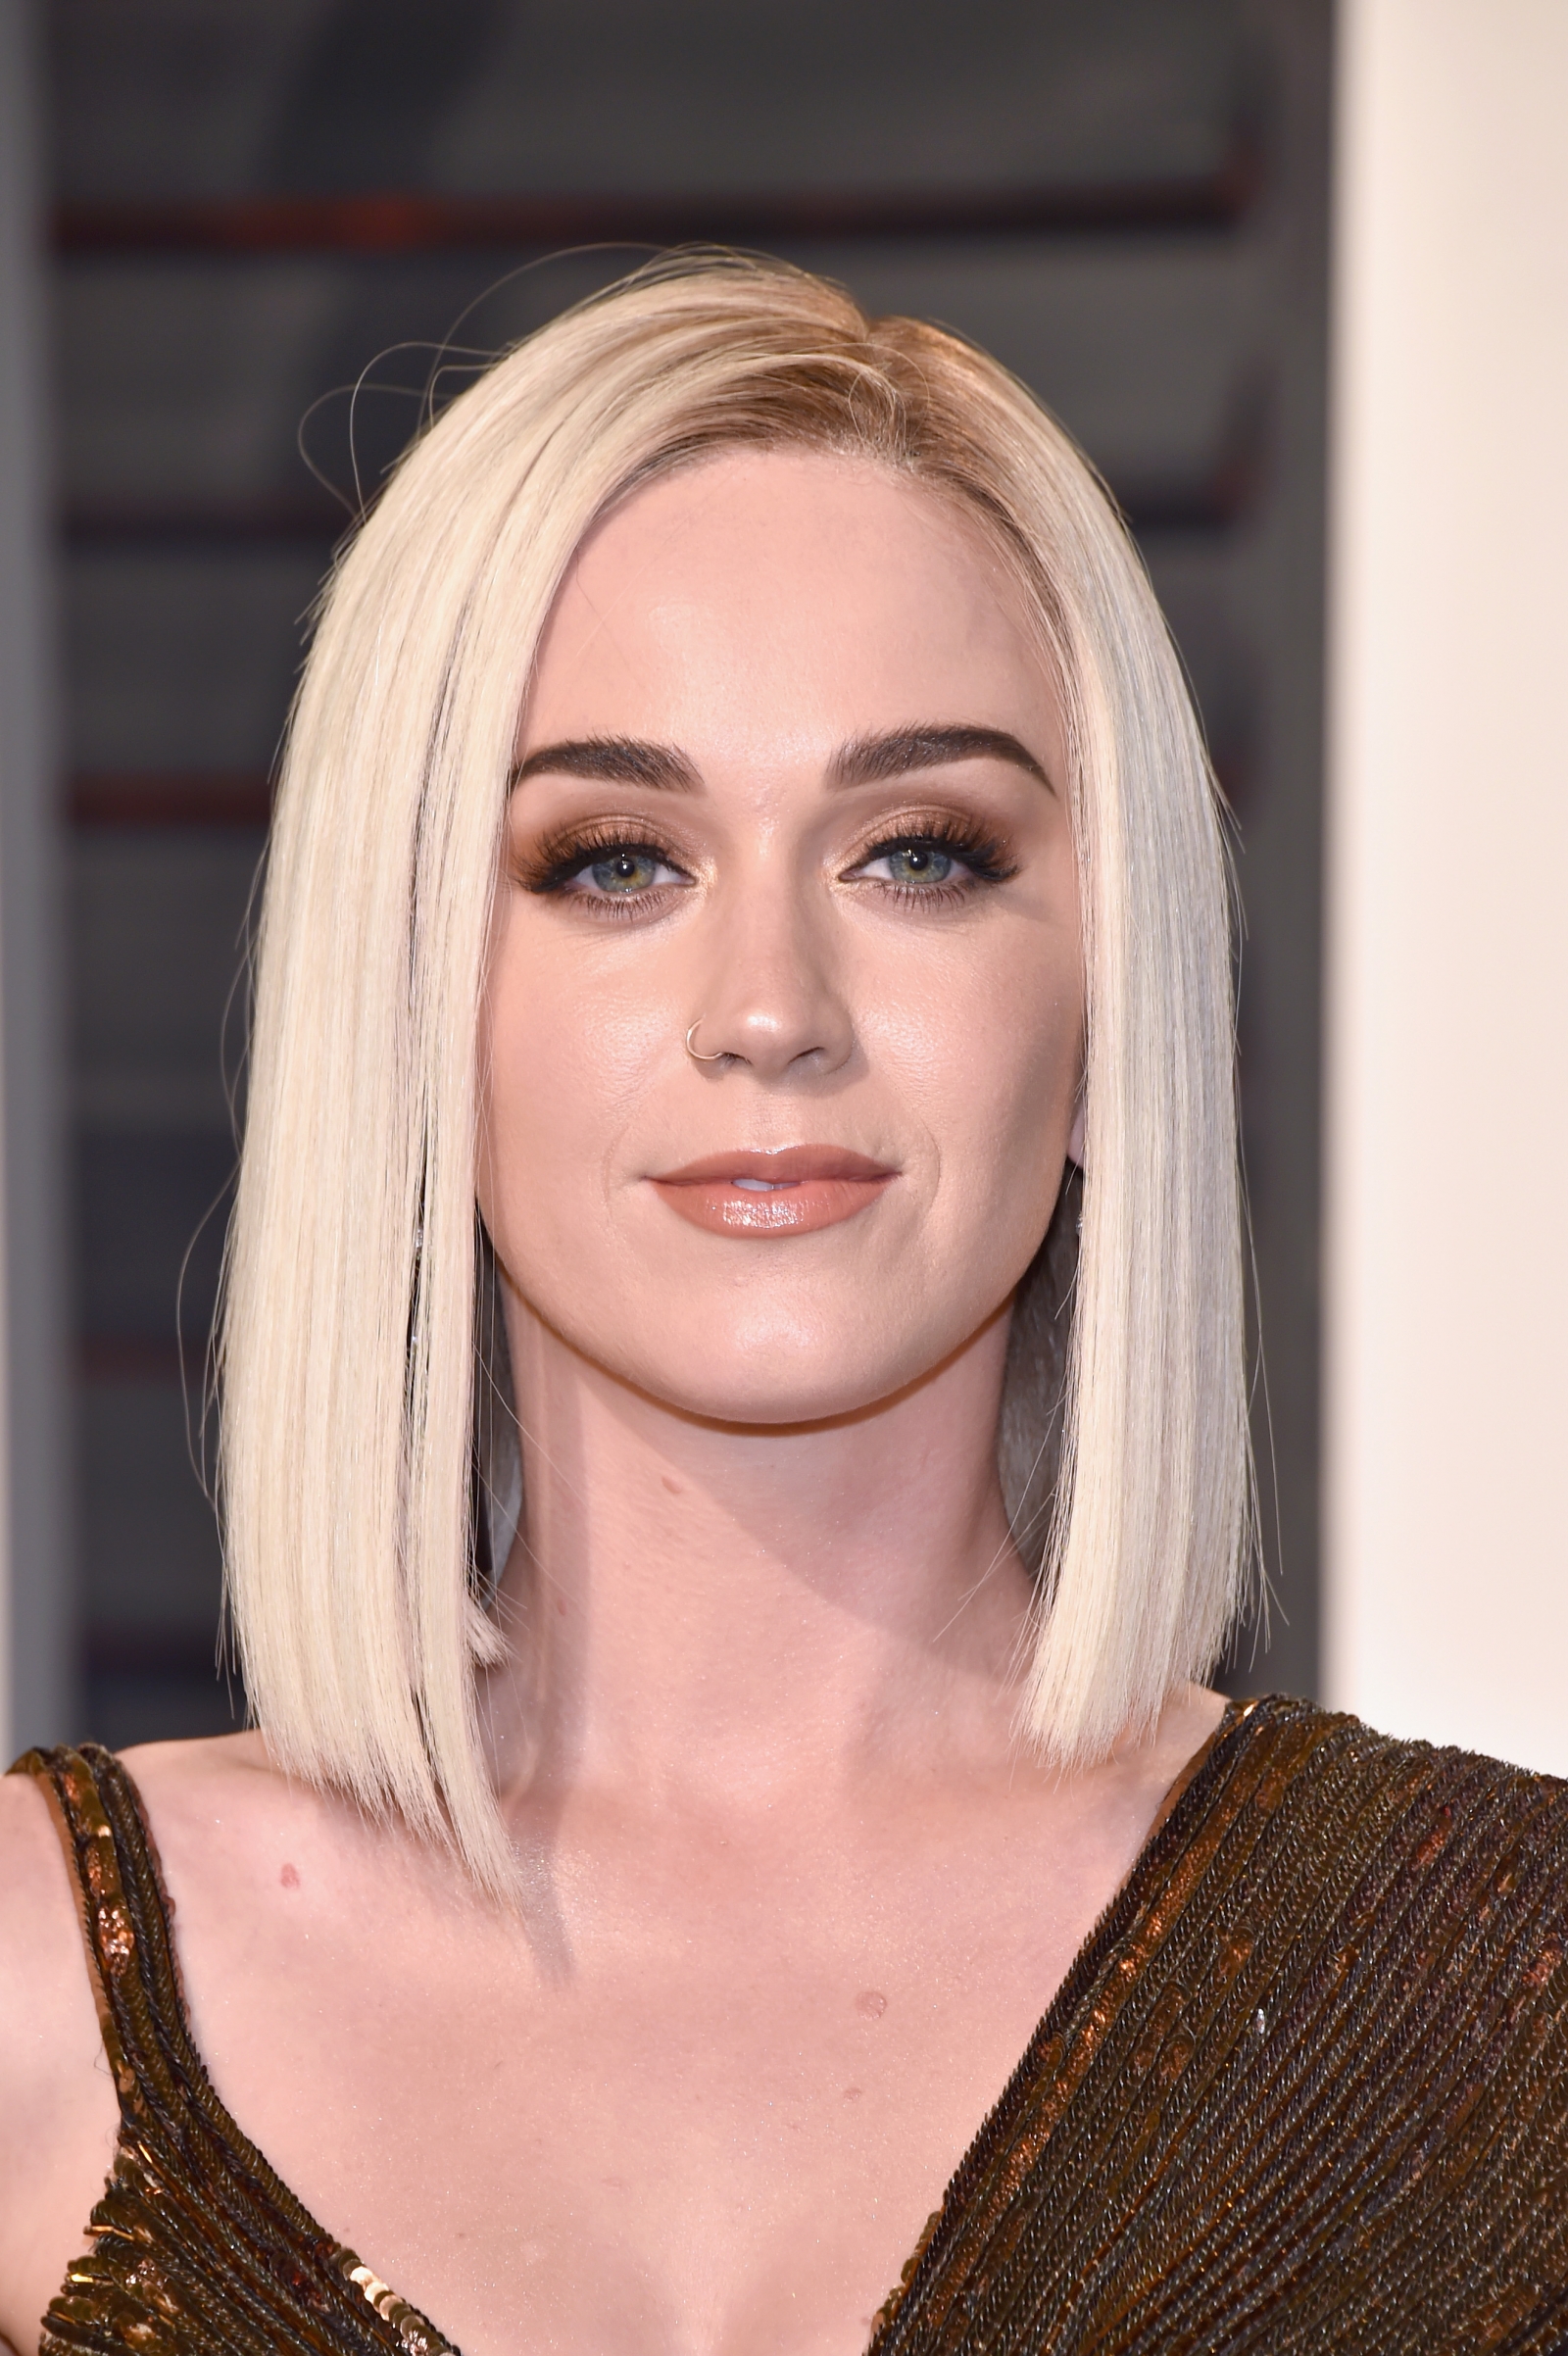 Katy Perry and Orlando Bloom split days after Oscars party – Where did ...